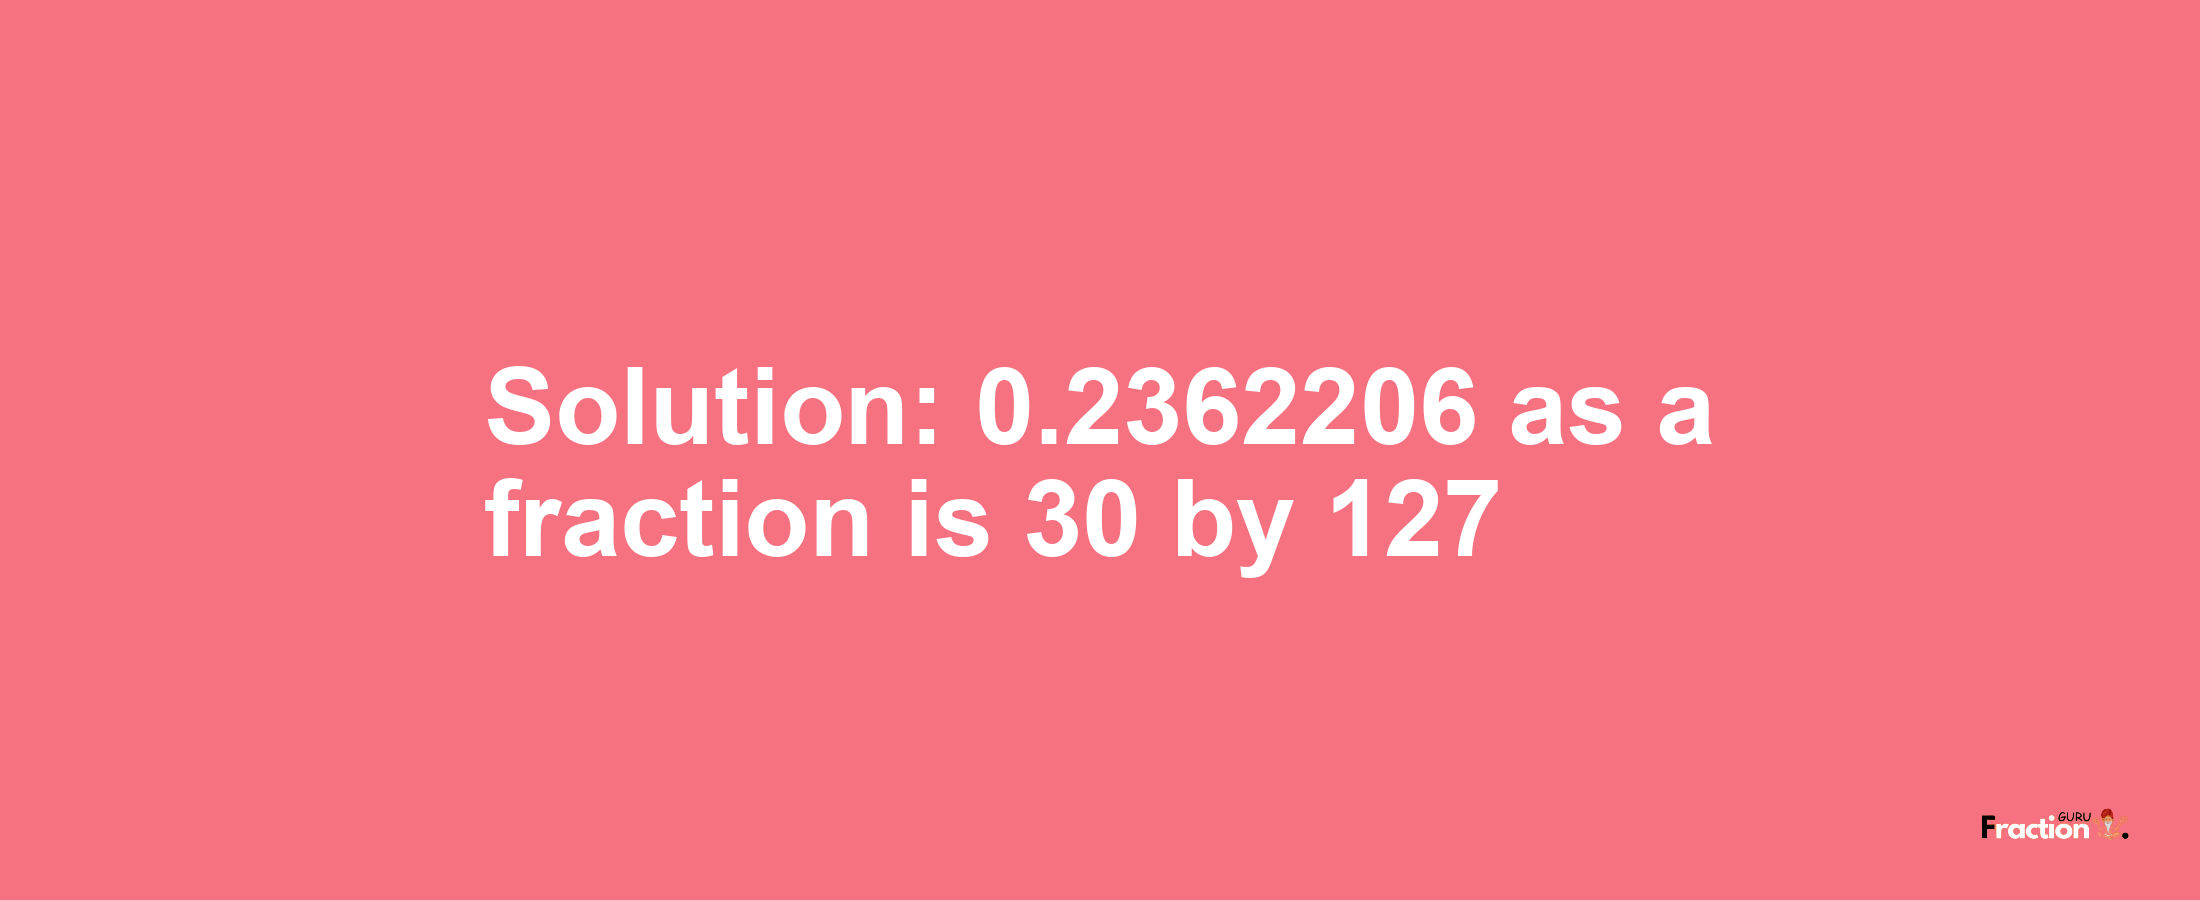 Solution:0.2362206 as a fraction is 30/127